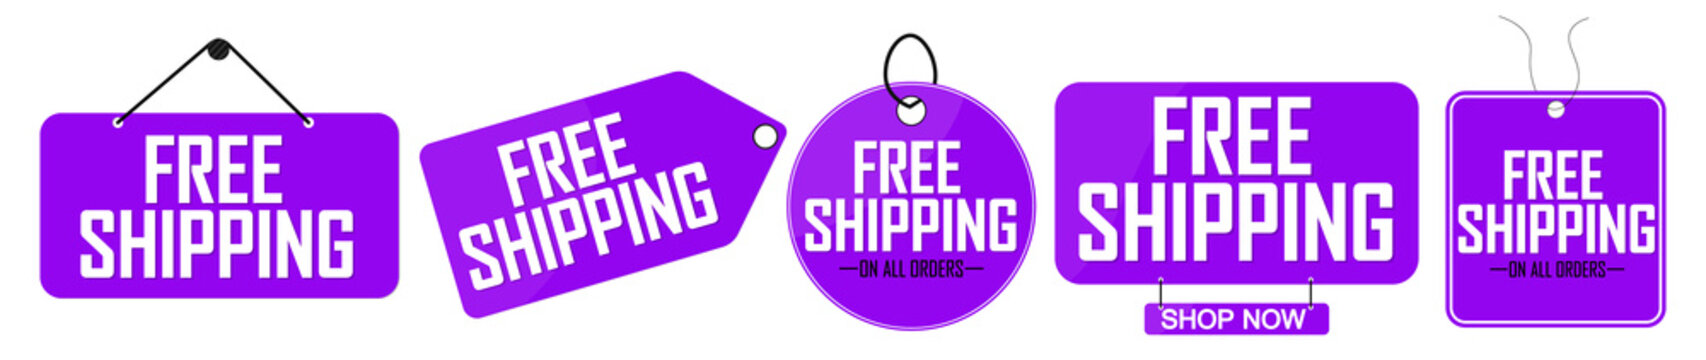 Set Free Shipping tags, promo banners design template, vector illustration